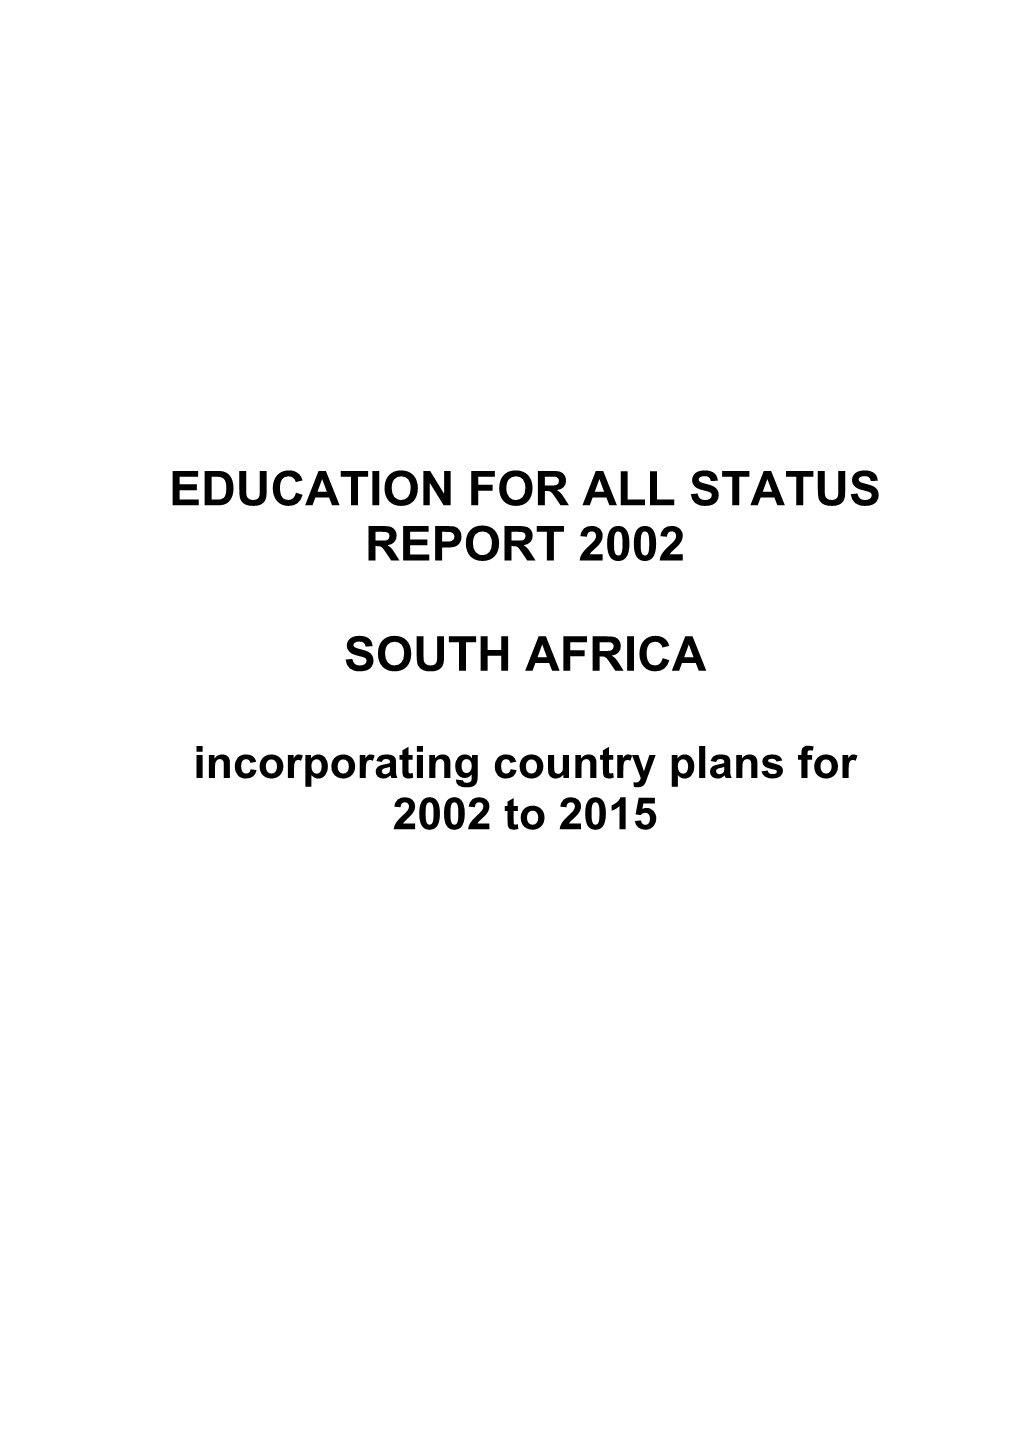 Education for All Country Status Report for South Africa 2002